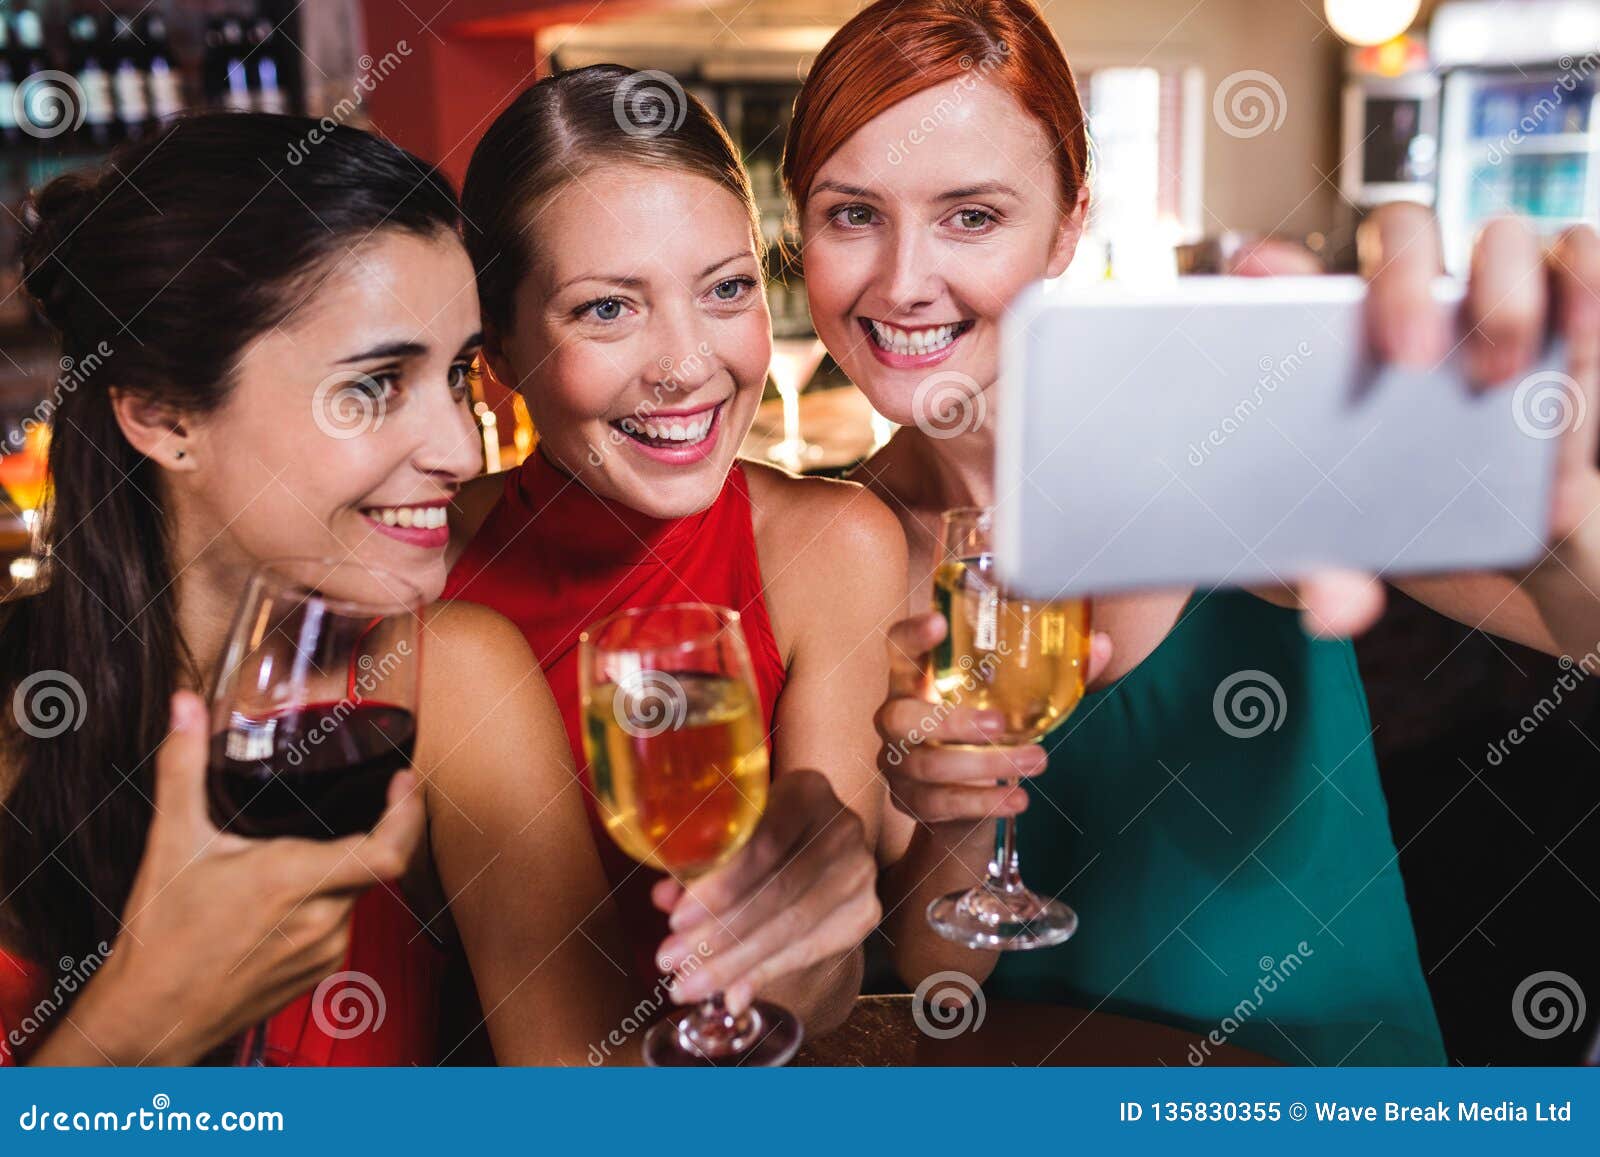 Female Friends Taking Selfie with Wine Glass in Night Club Stock Image ...